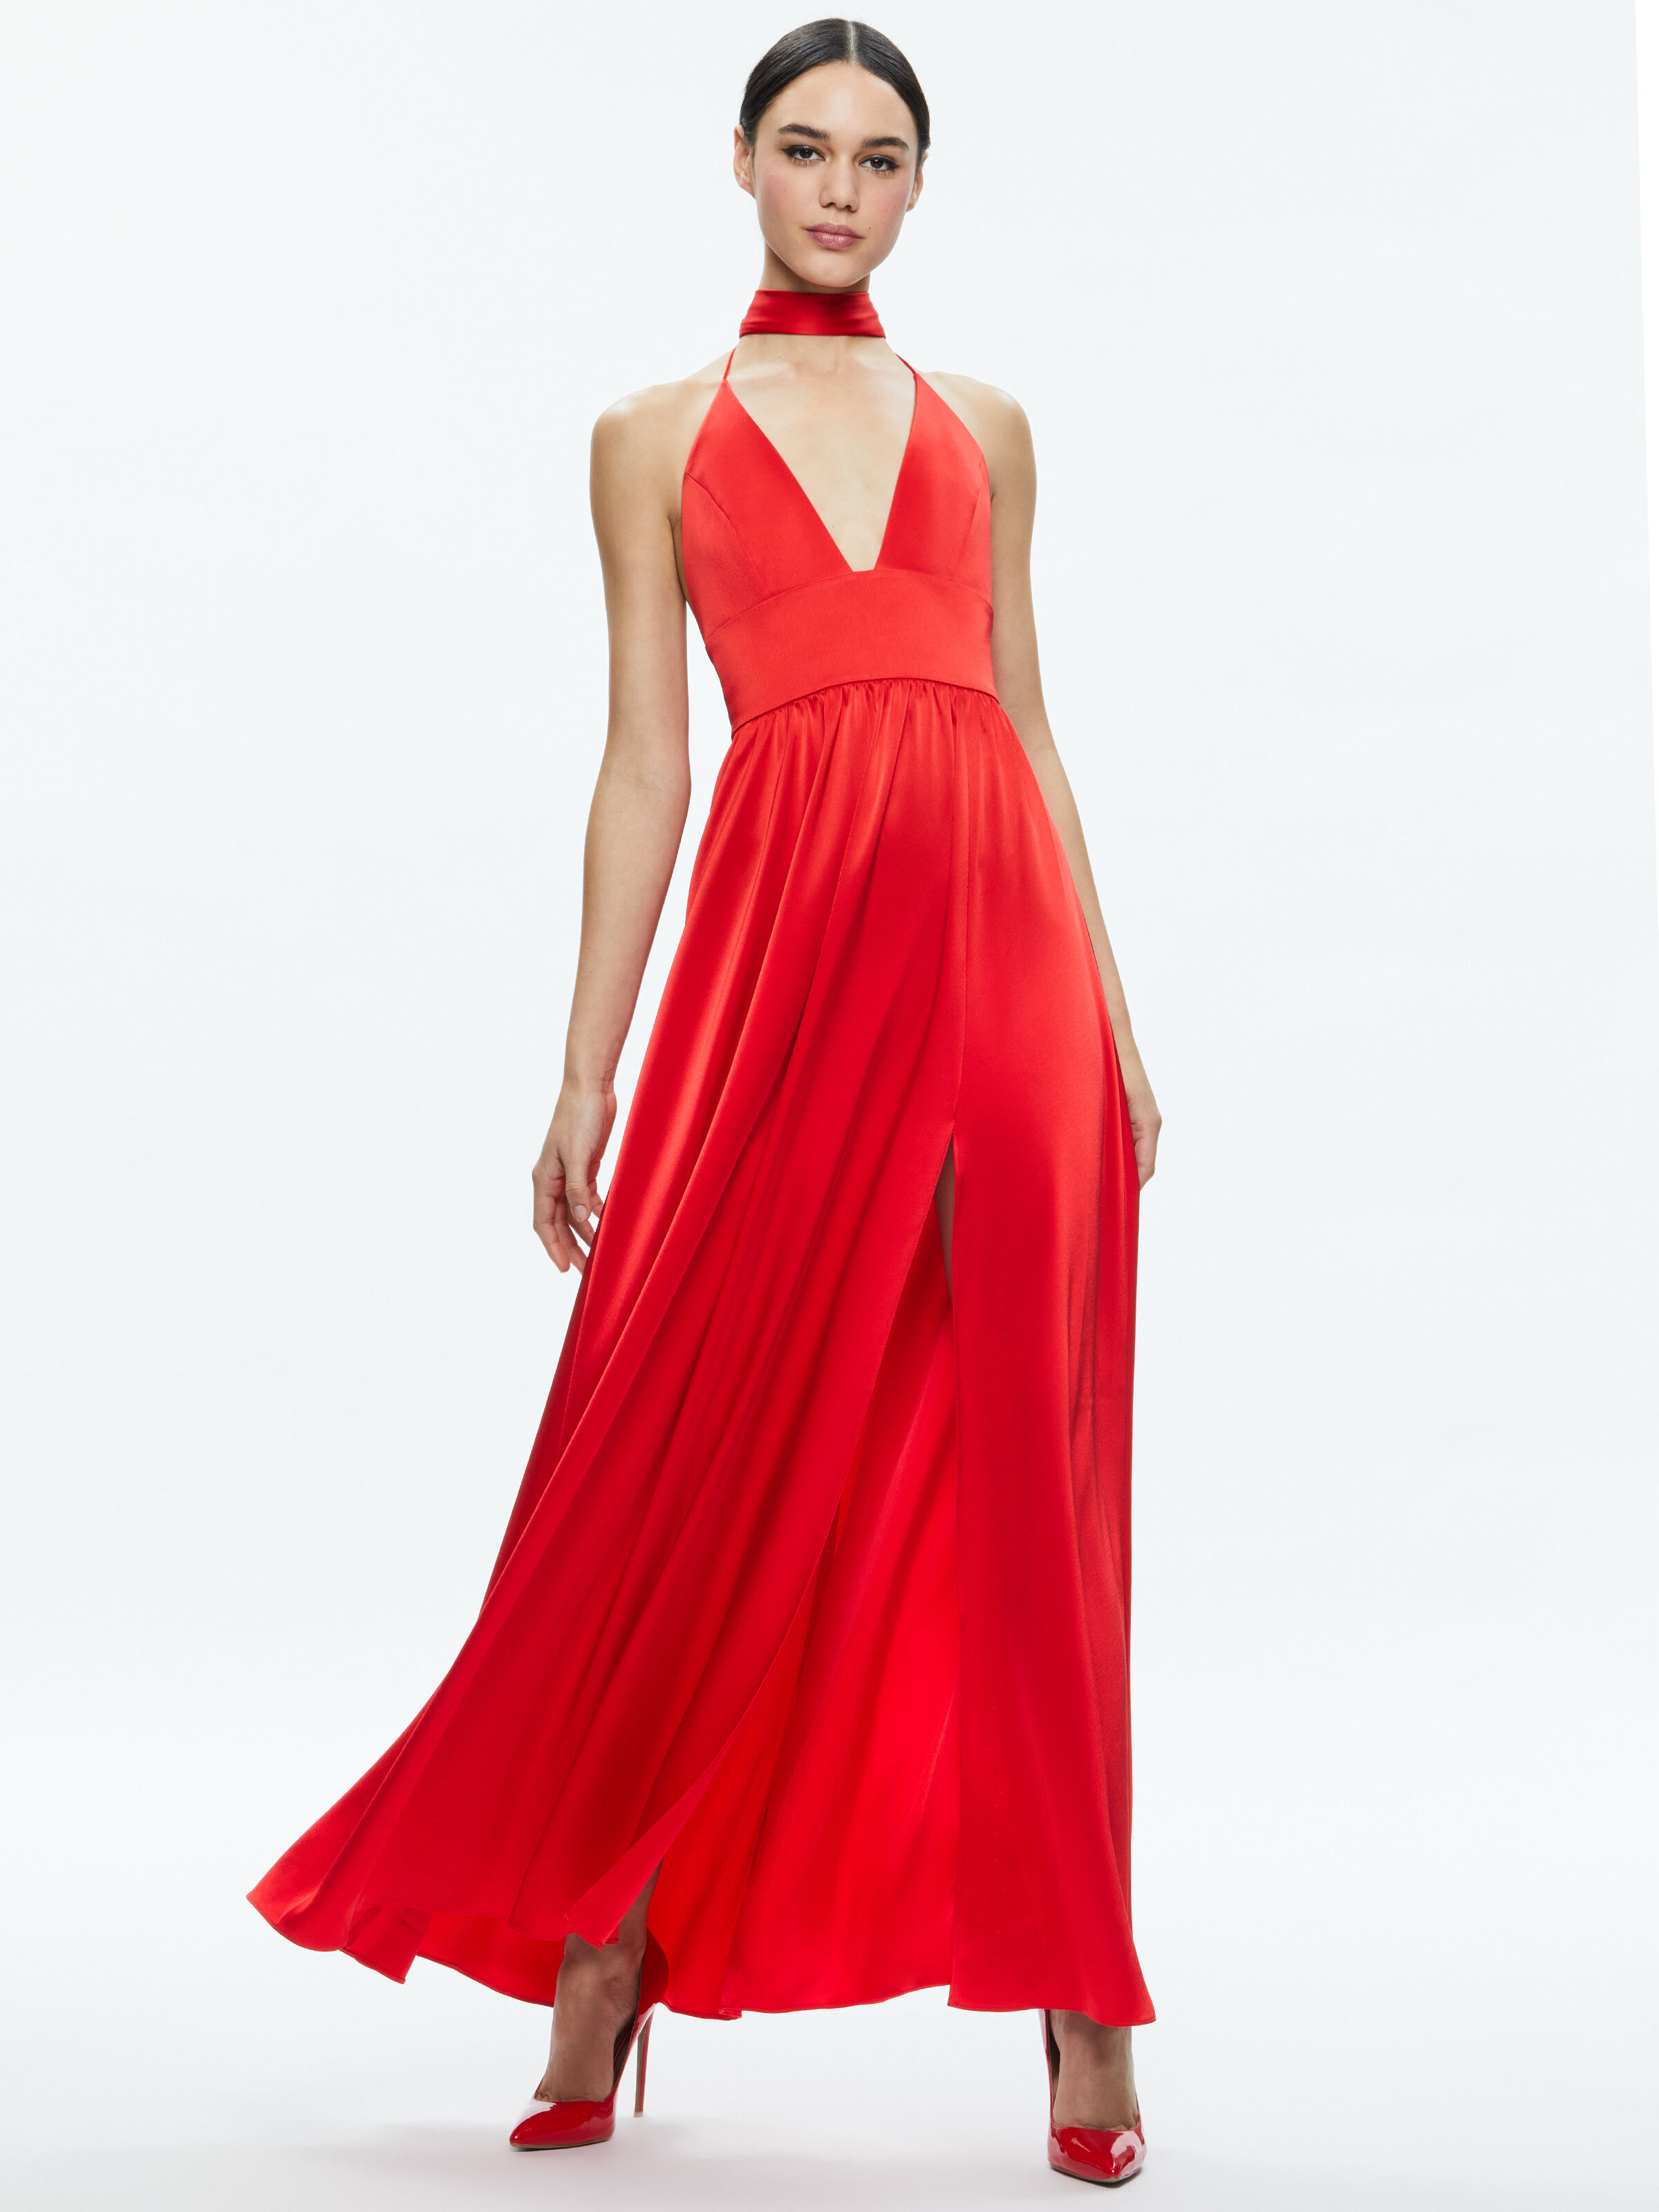 Buy Gowns For Women At Affordable Prices Online In India | Tata CLiQ